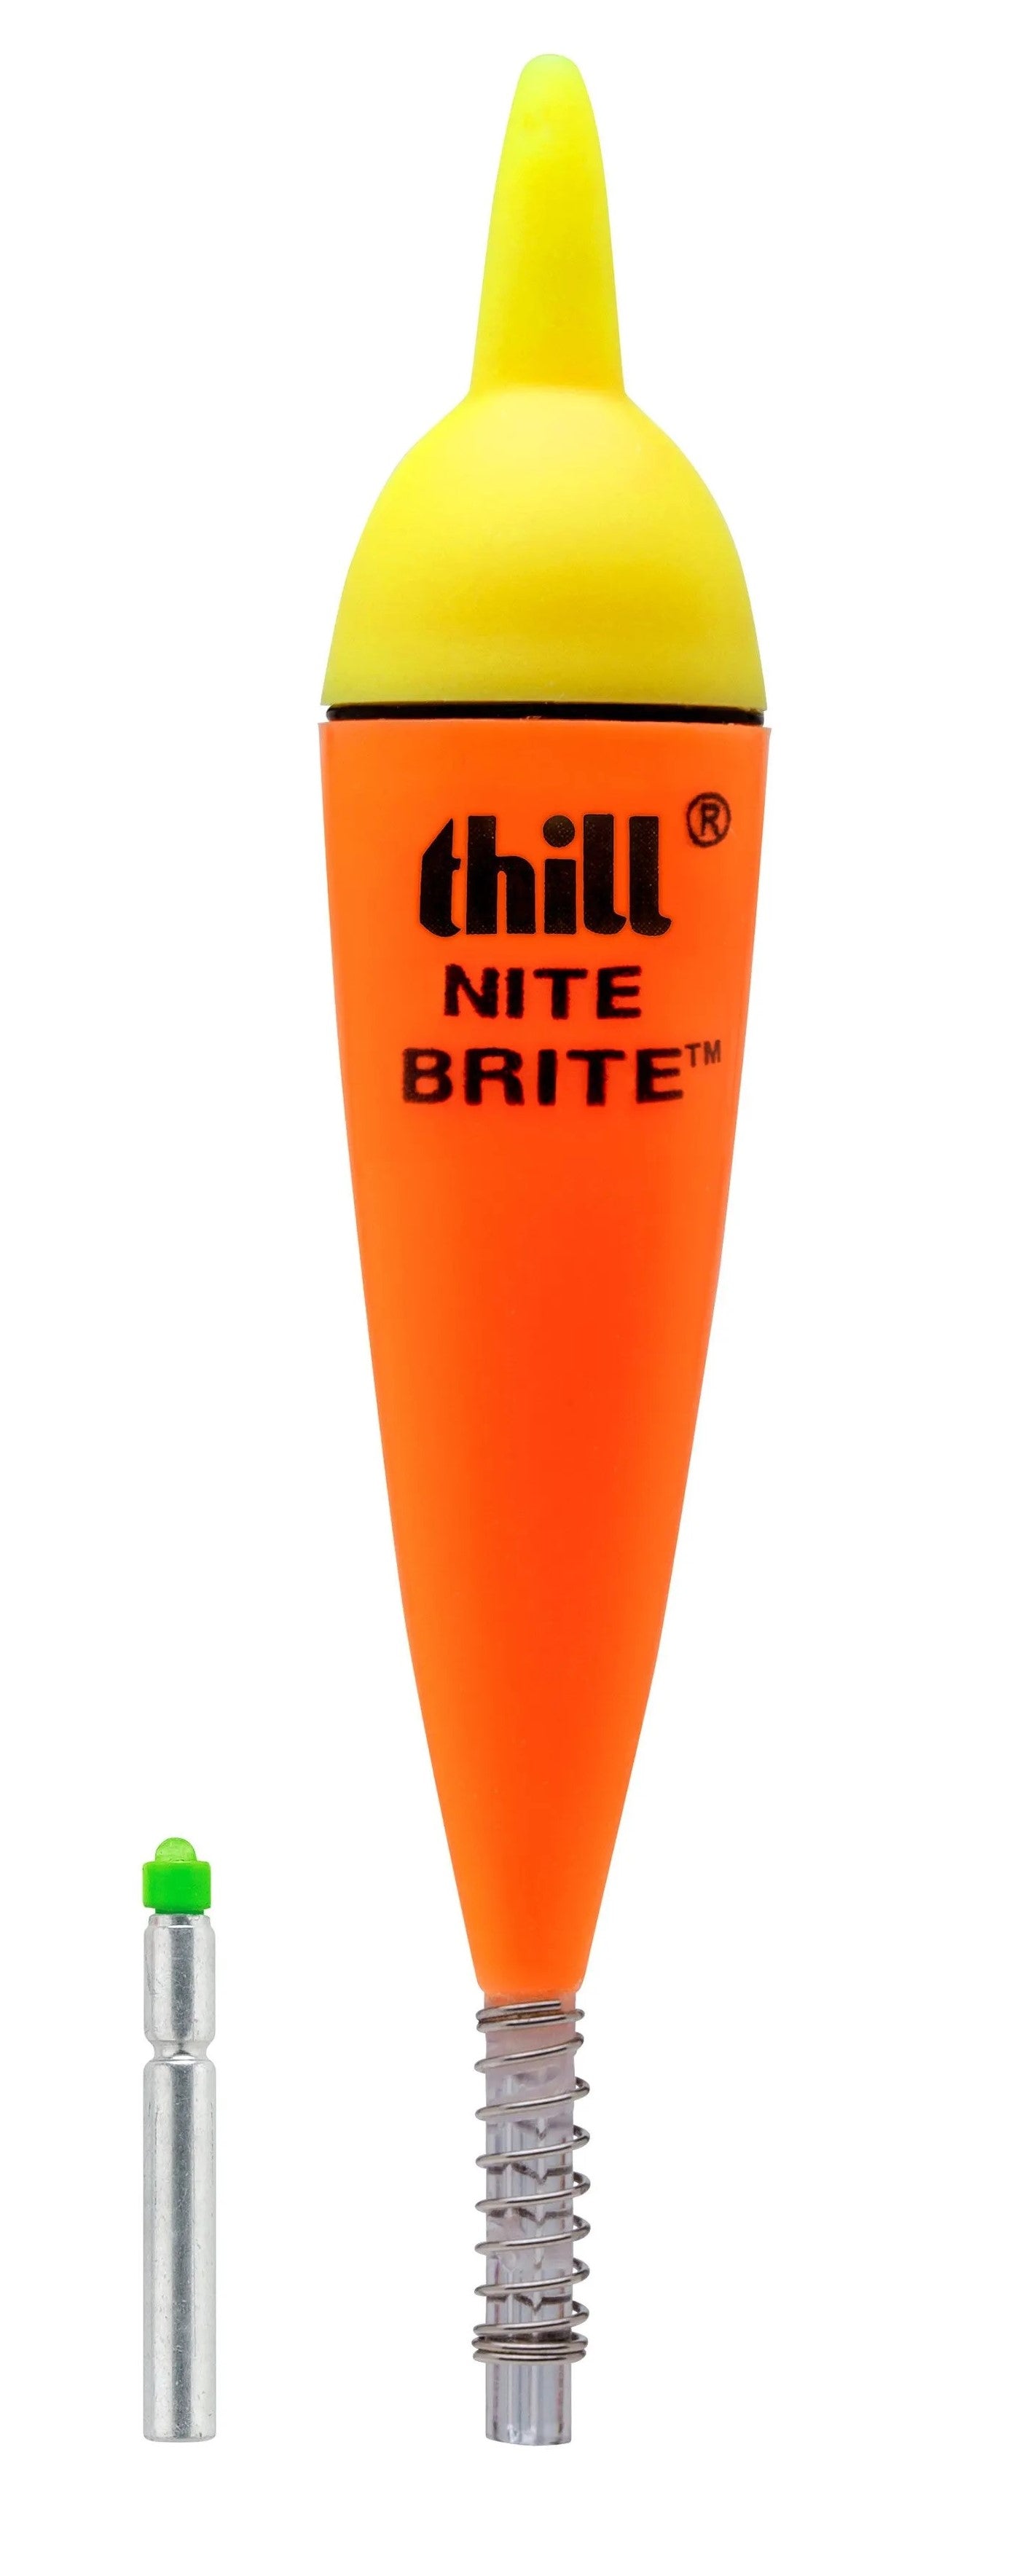 Thill Nite Brite Lighted Float - Red